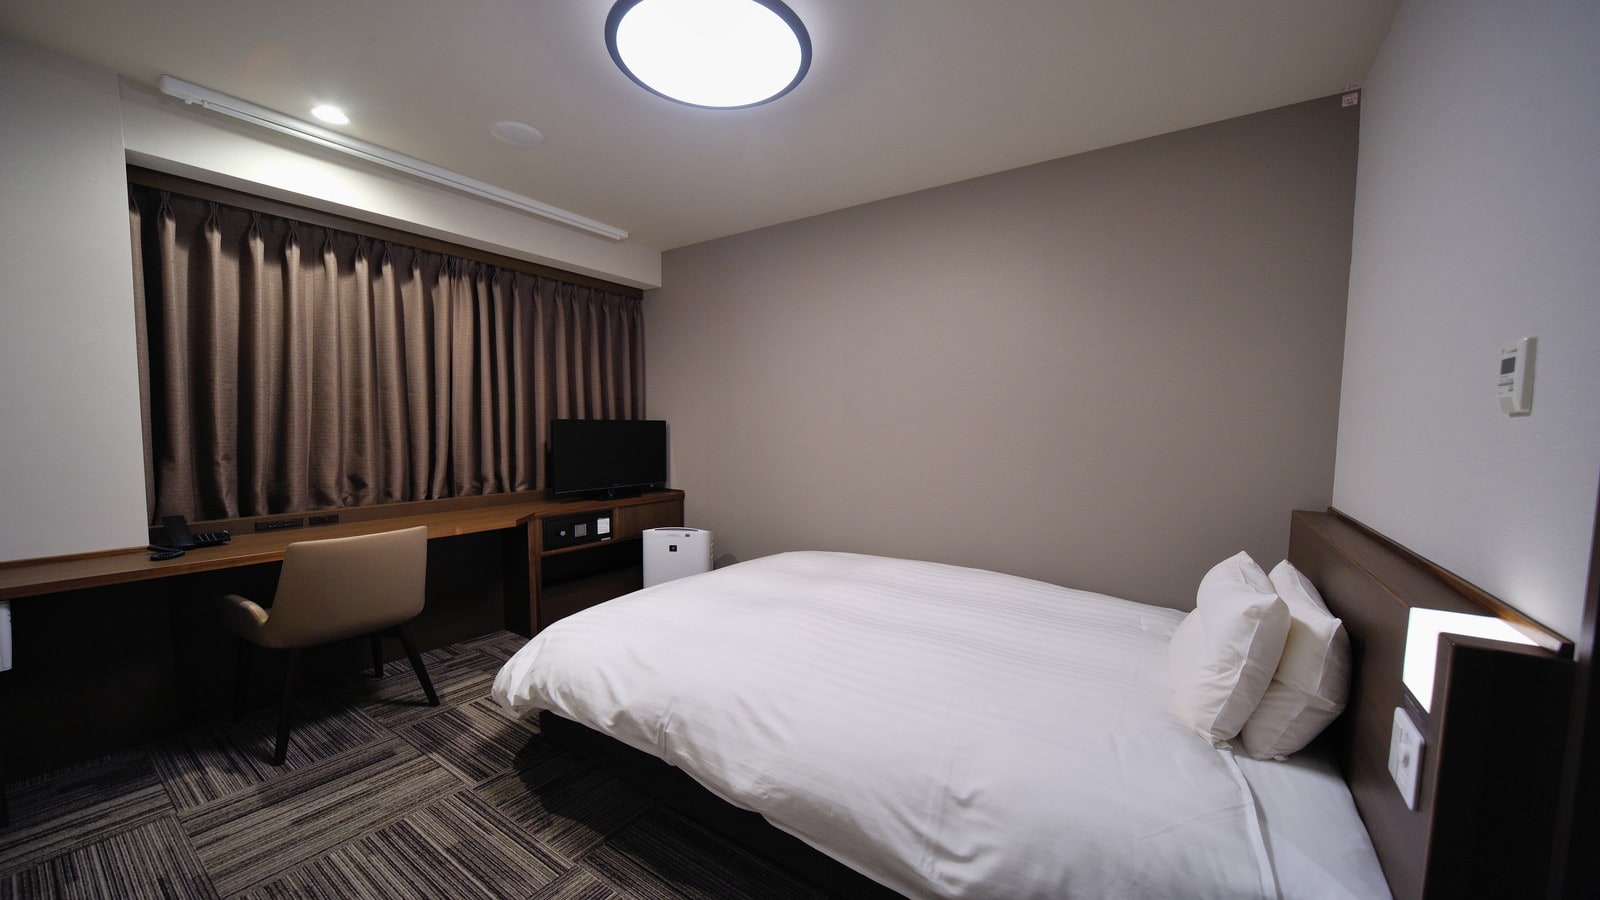 Double room [No smoking] (140 & times; 195 cm) Approximately 19 square meters Recommended for long-term stays! Microwave / 2-door refrigerator